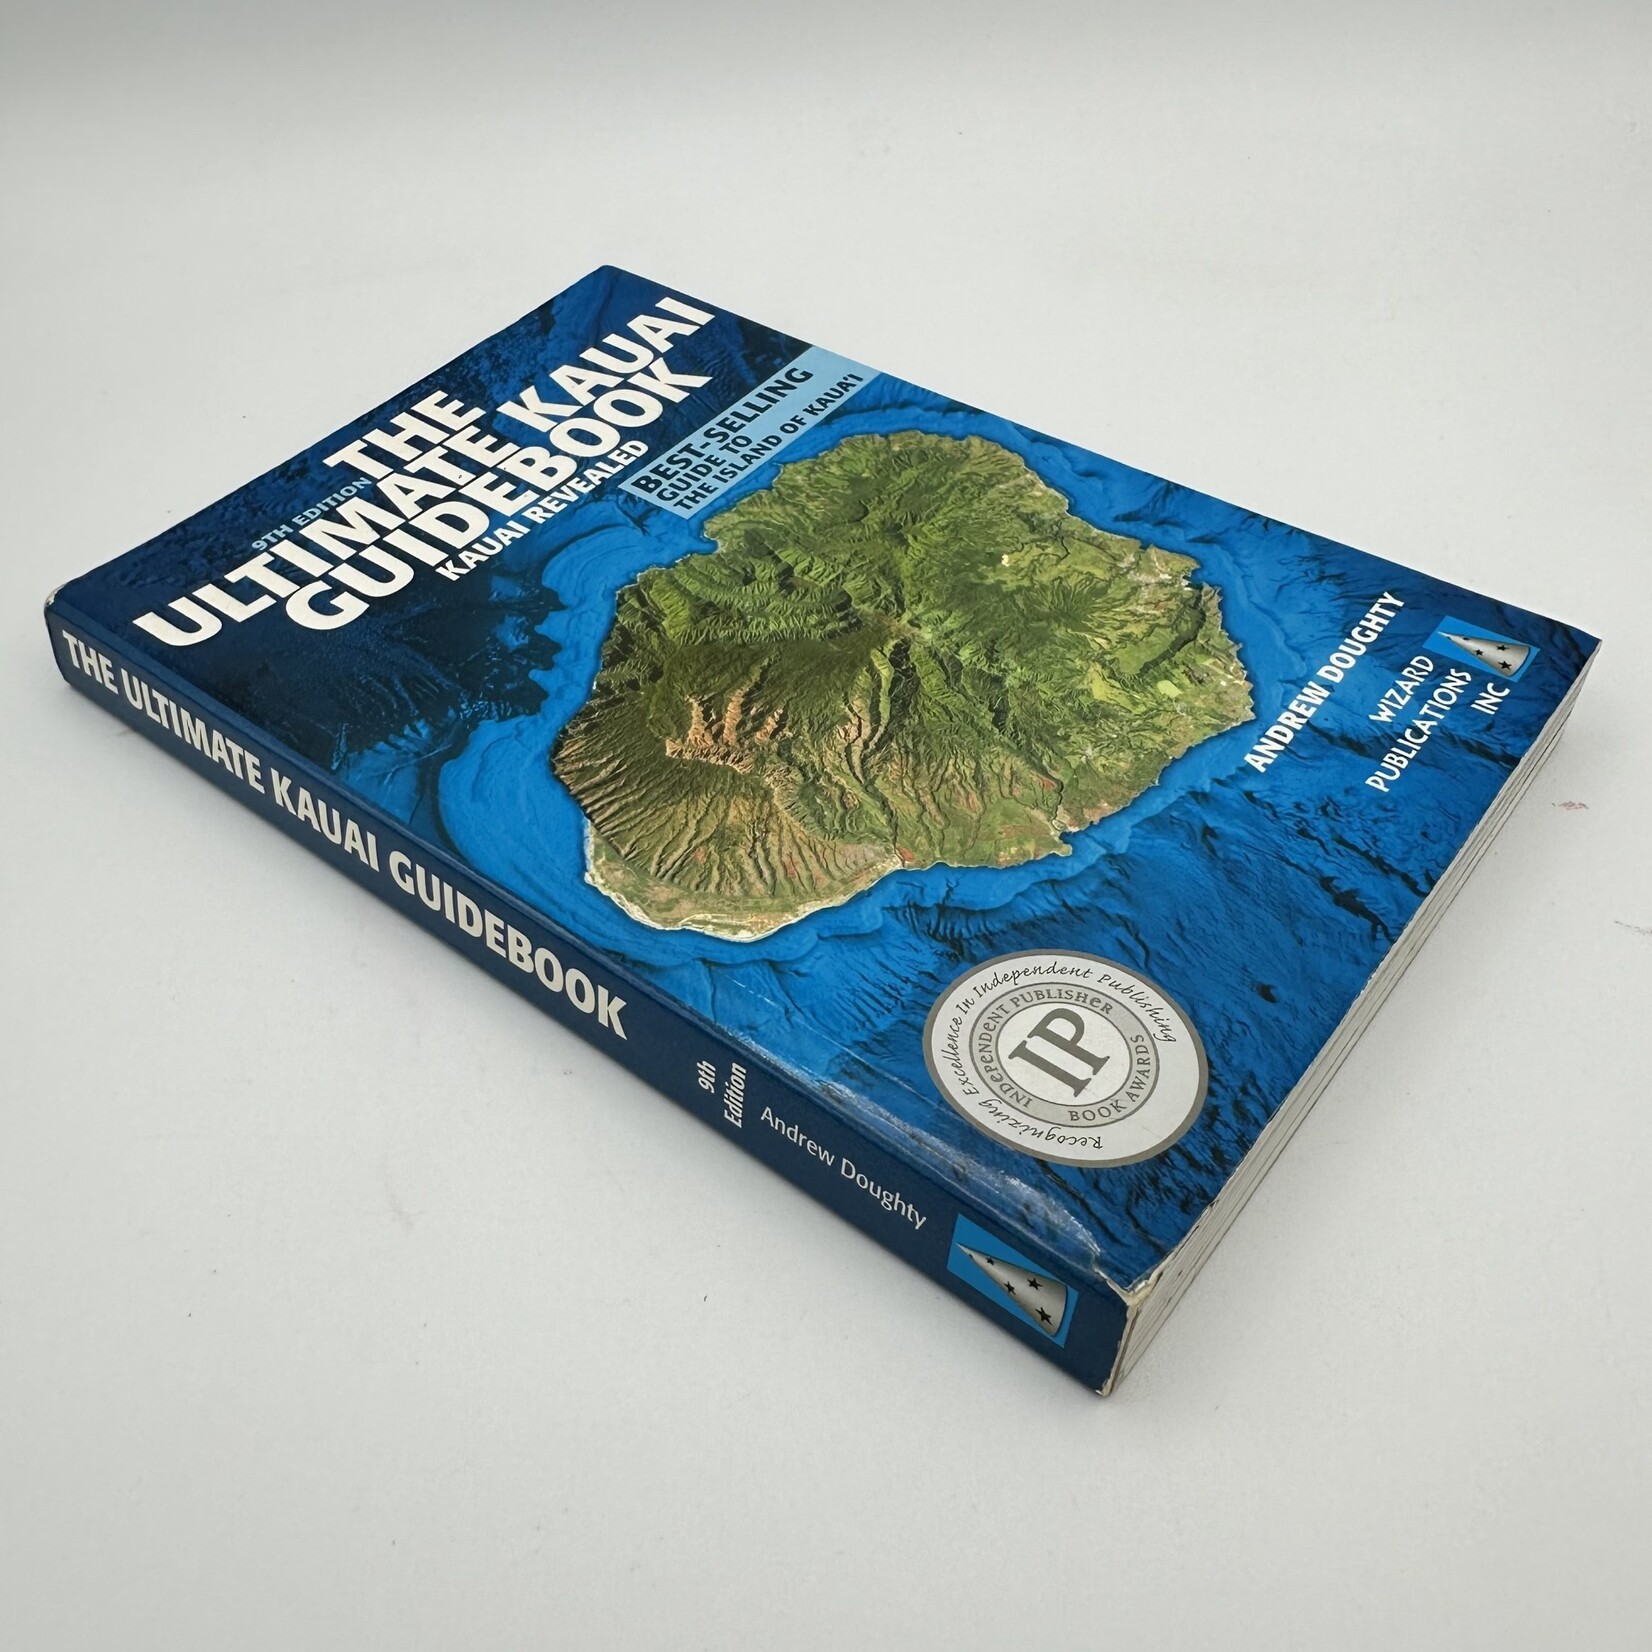 Mission Zero ReLoved Book - Andrew Doughty - The Ultimate Kauai Guidebook 9th Edition 2014